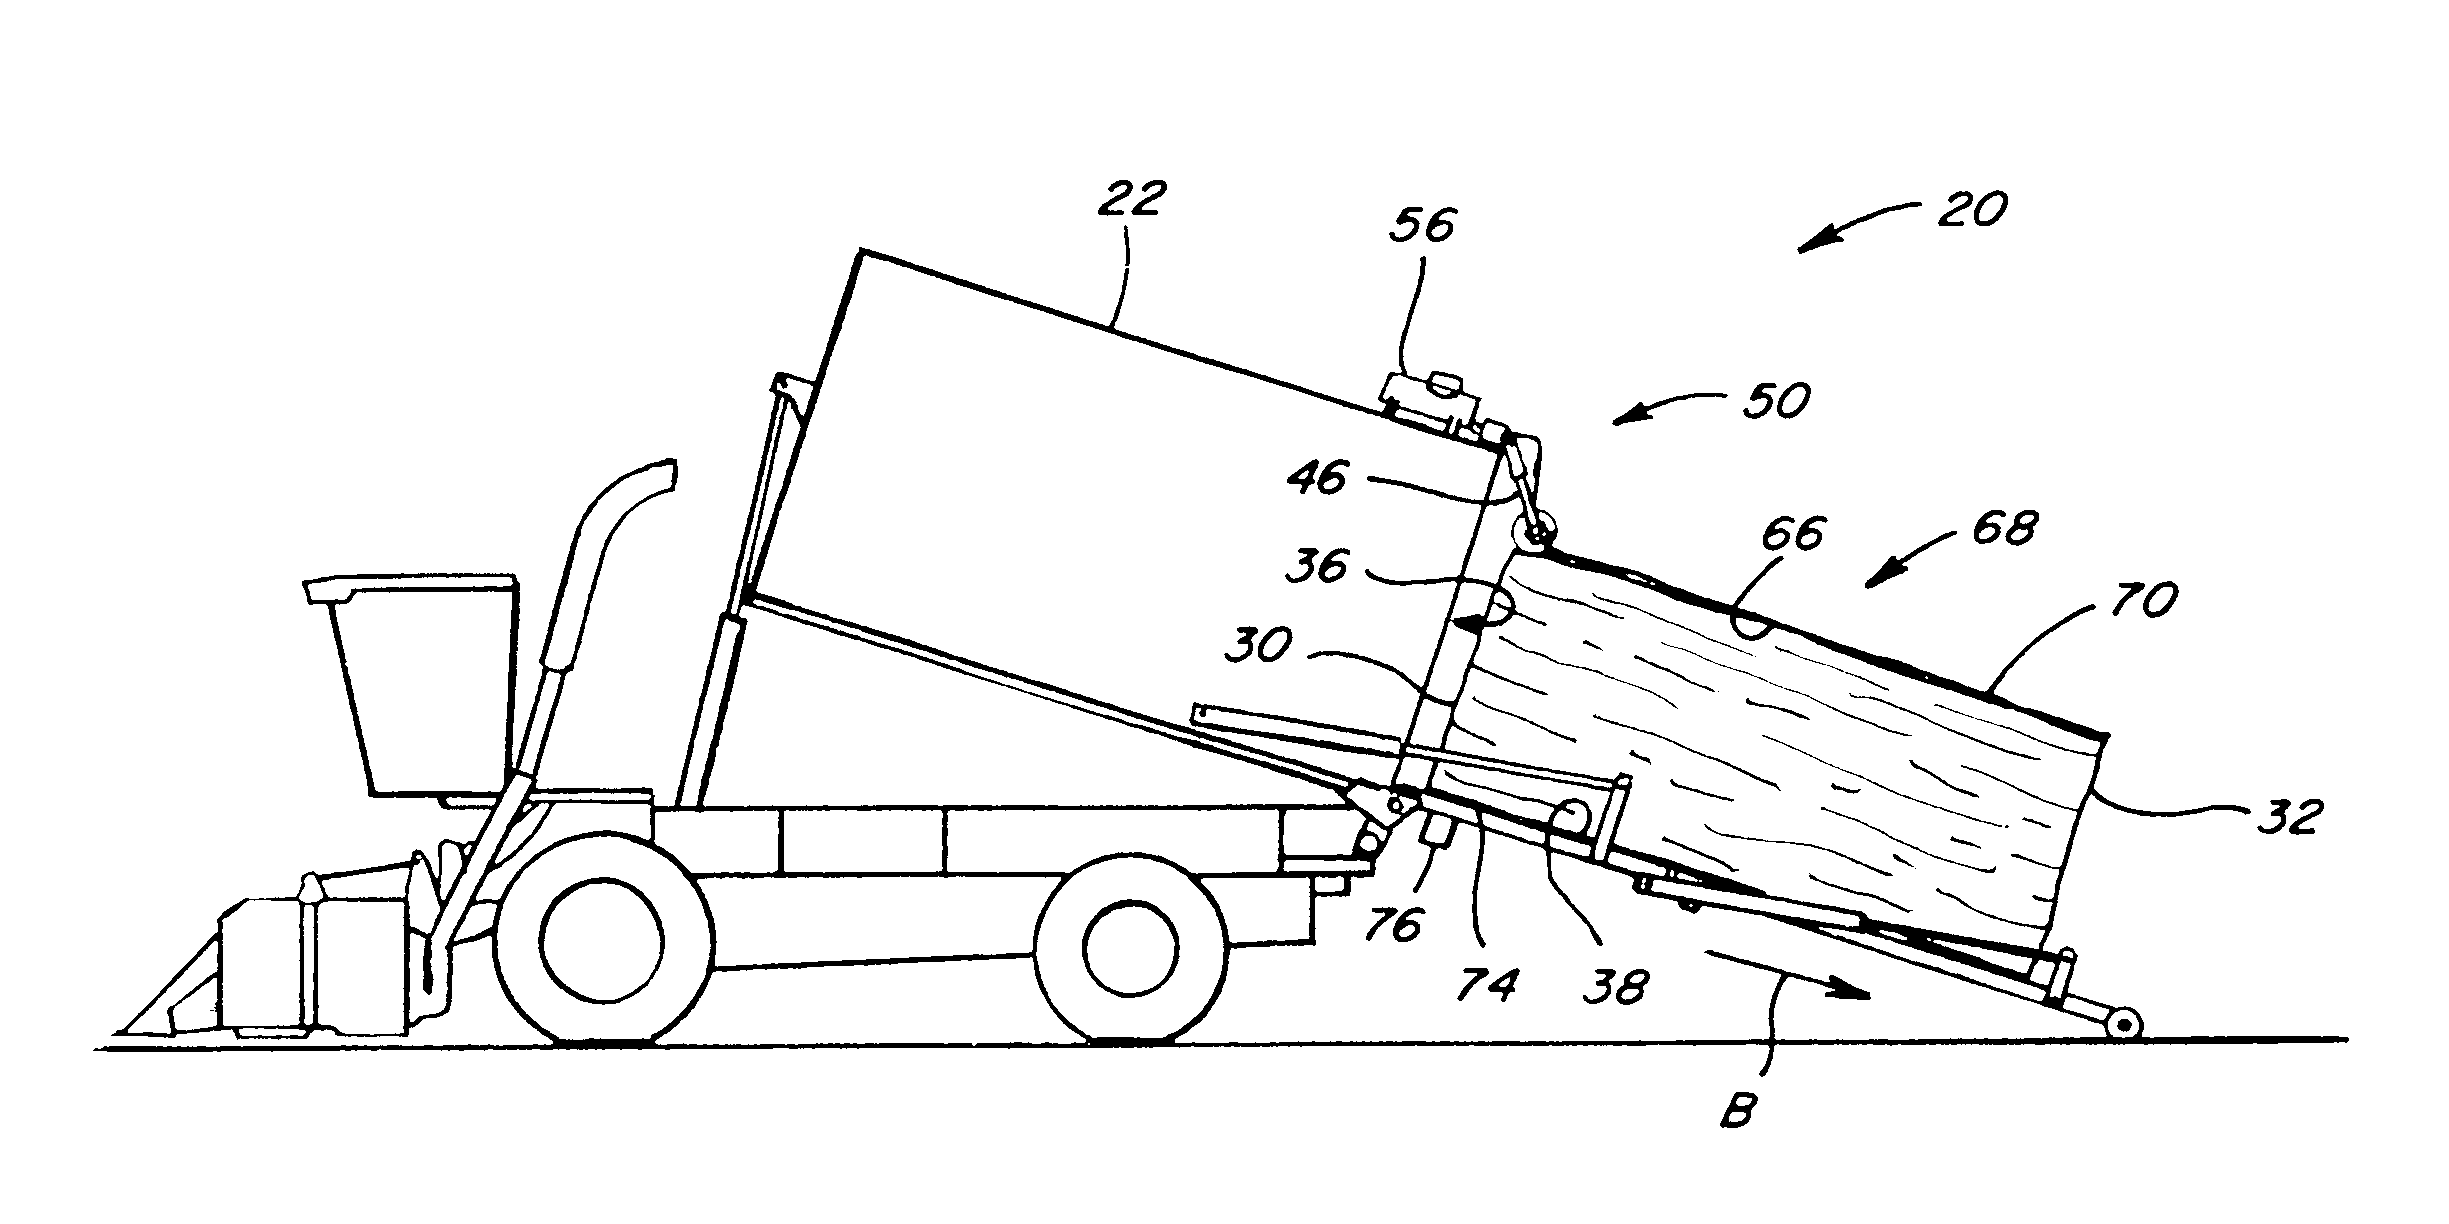 System and method for protecting a cotton module during the unloading process